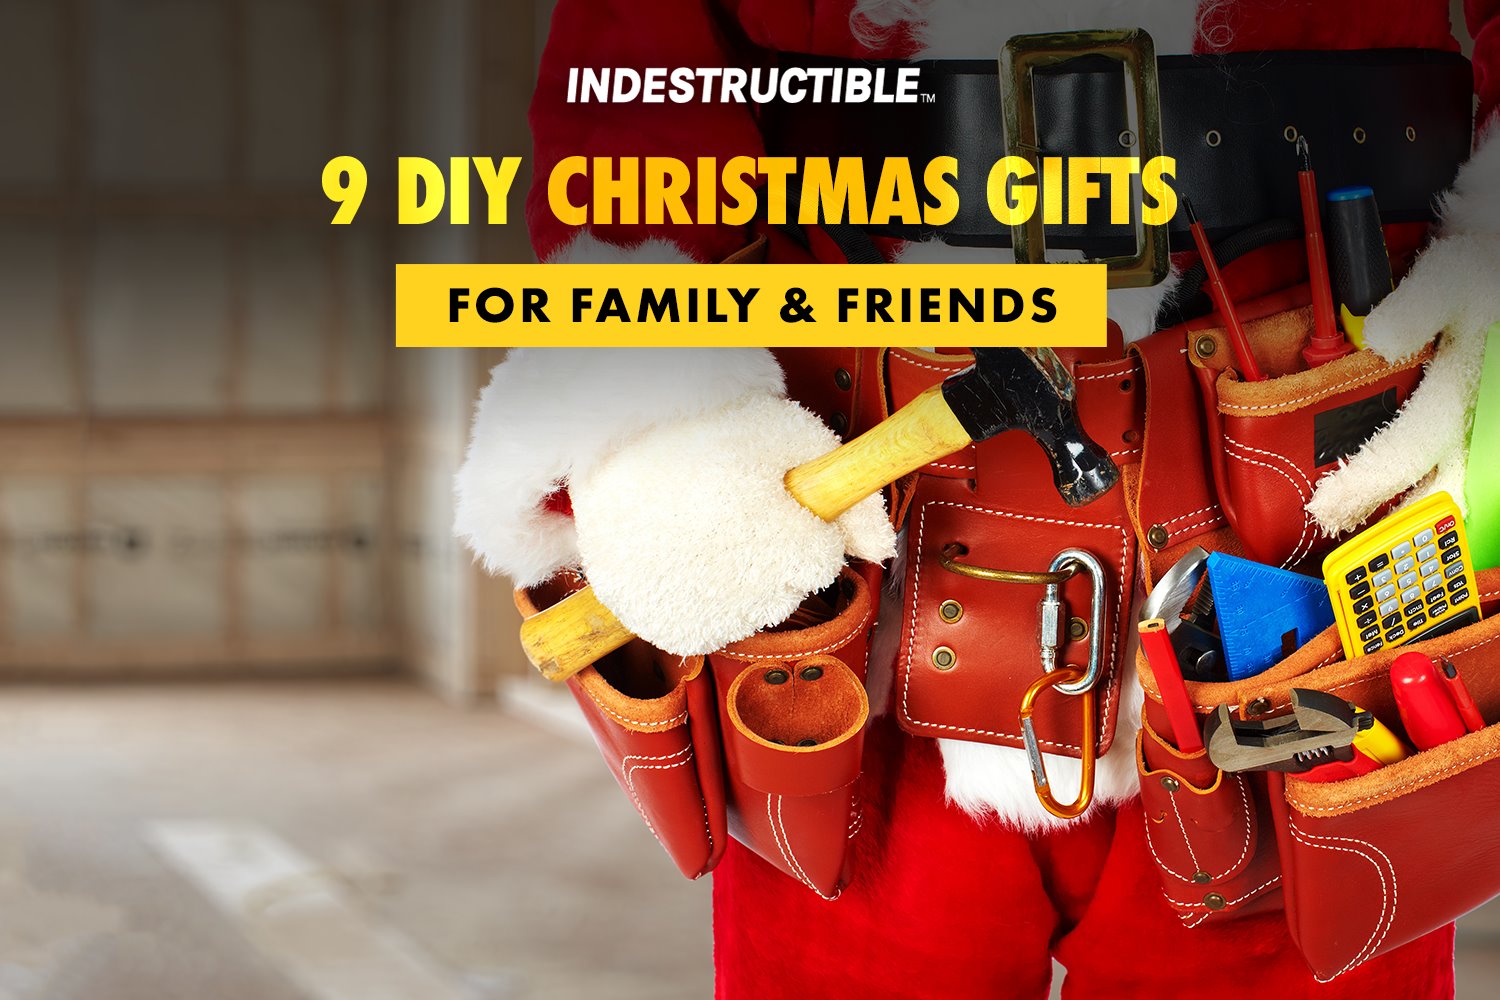 9 DIY Christmas Gifts For Family & Friends